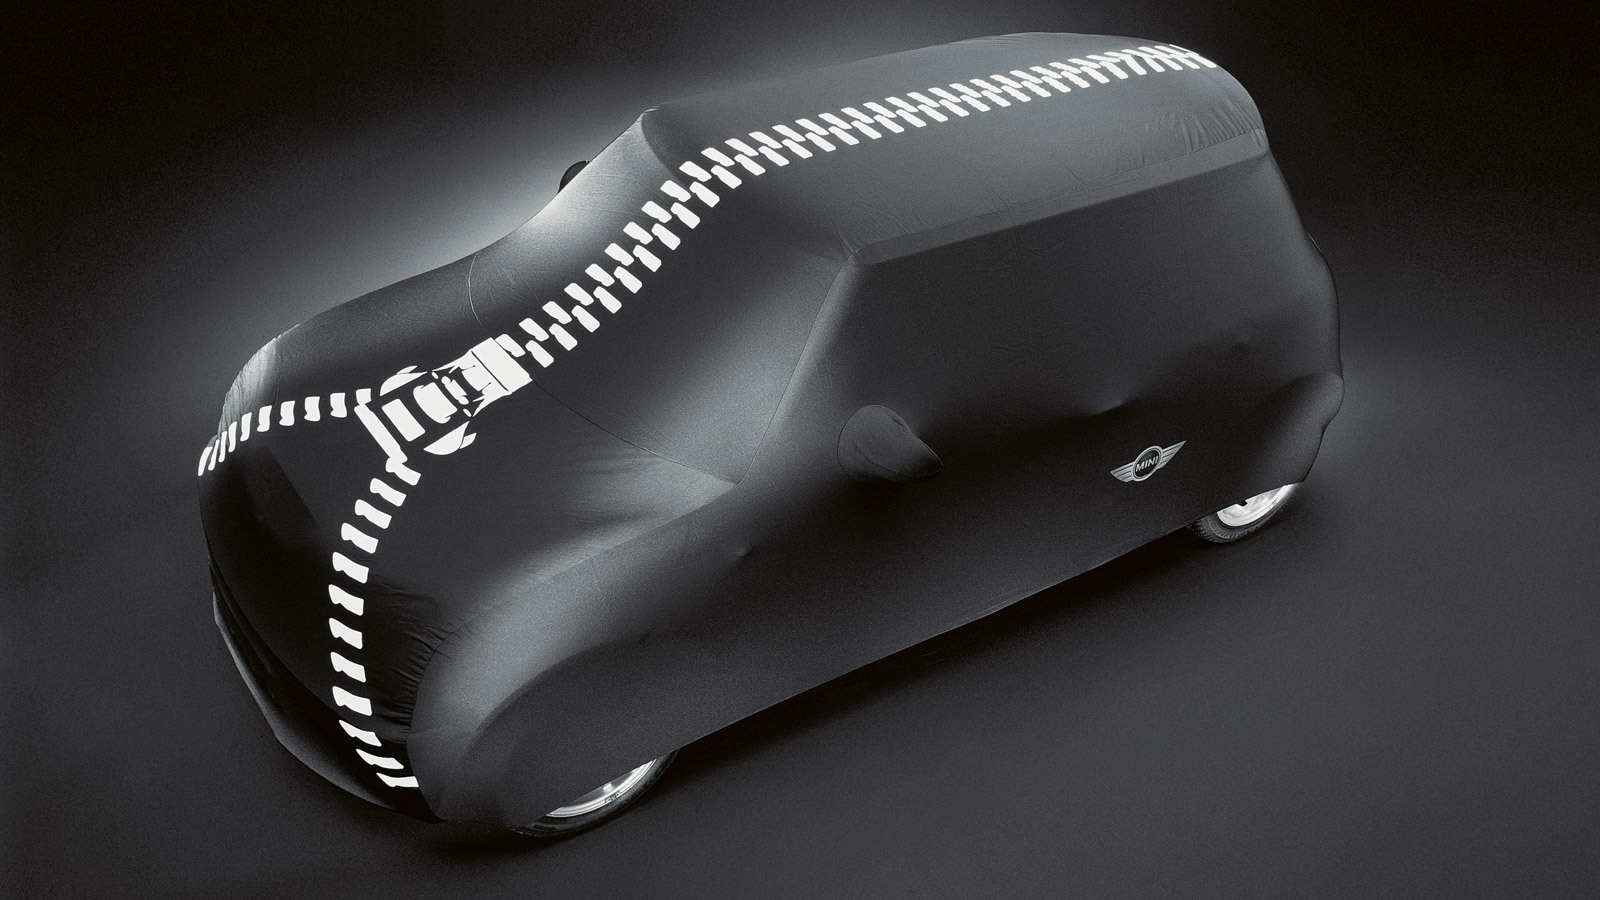 2014 MINI Cooper’s reveal will coincide with 107th anniversary of Alec Issigonis’ birth